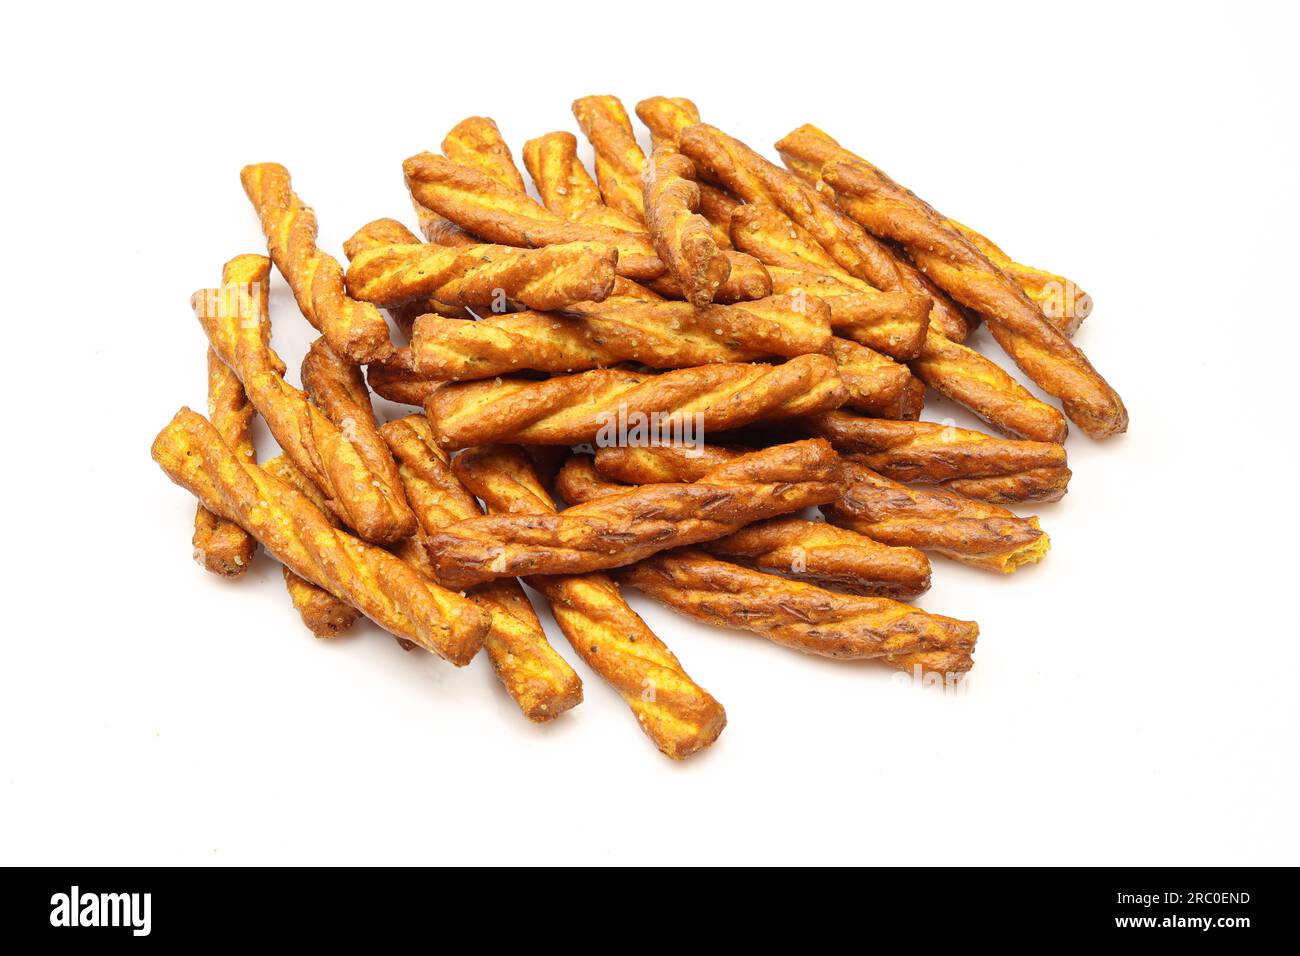 Group of salty and  twisted pretzel sticks isolated on white background. Italian snack Stock Photo